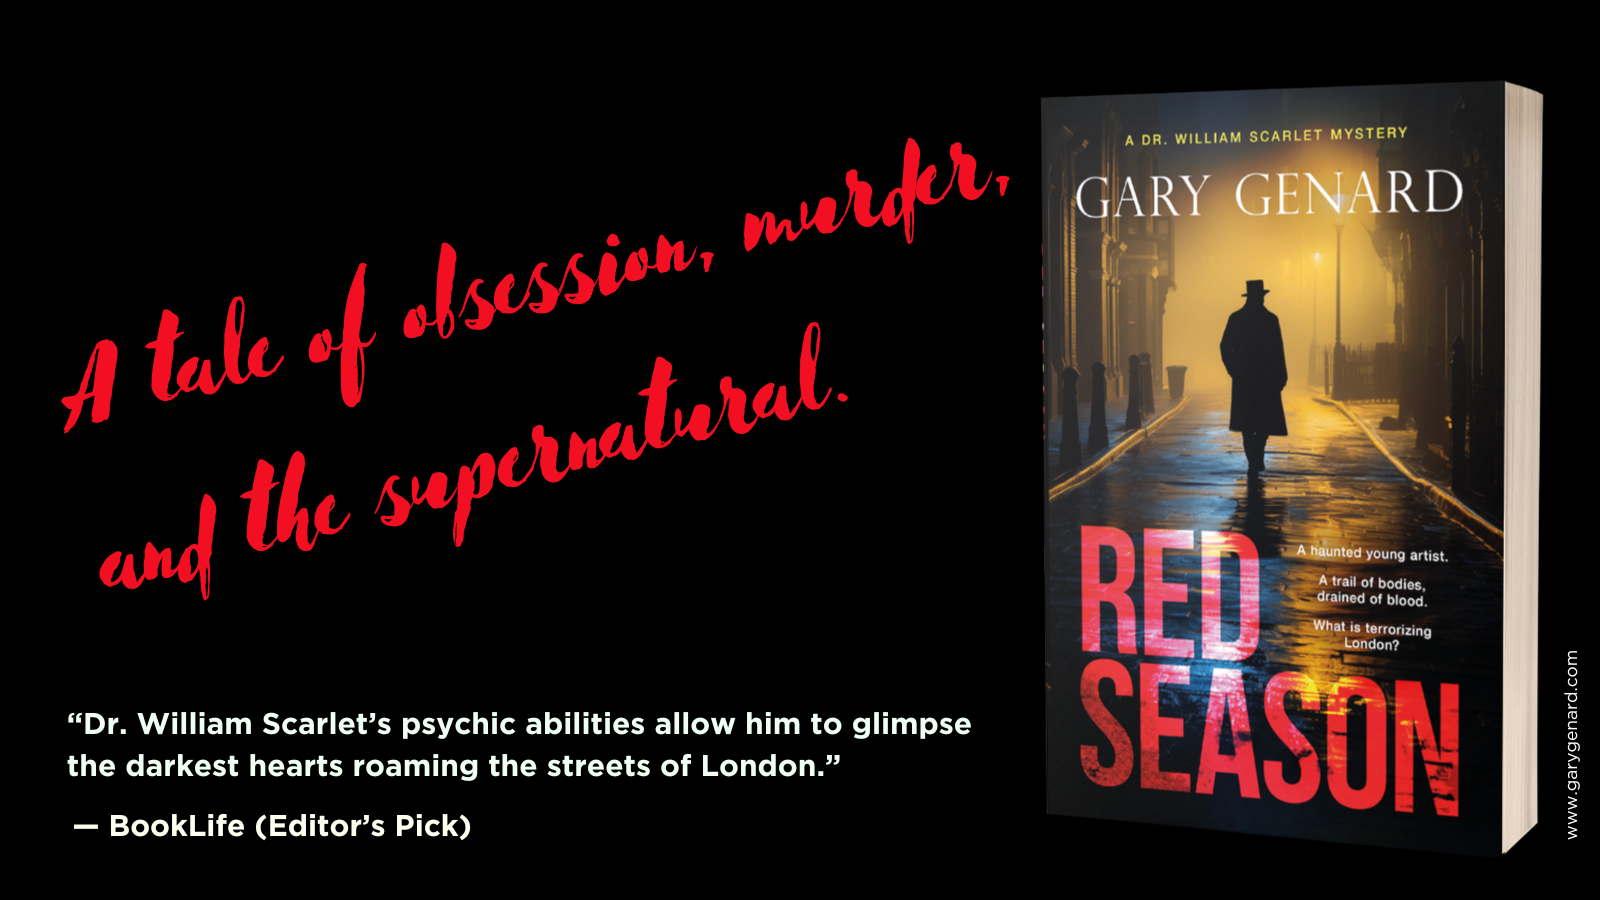 Red Season: Book #1 in the Dr. William Scarlet Mysteries, by Gary Genard.